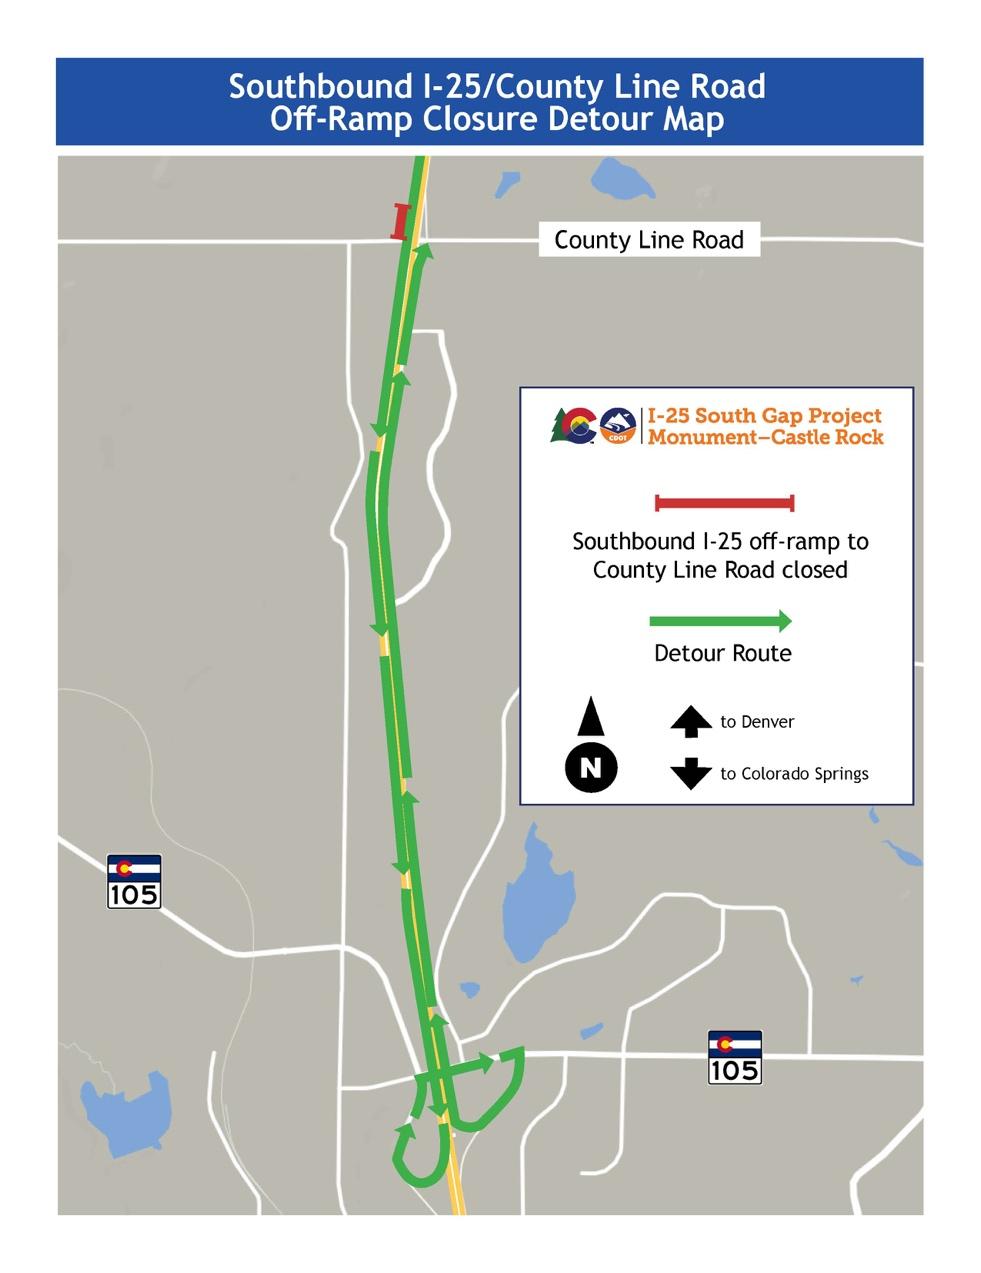 Detour map for Saturday night into Sunday morning along Southbound I-25/County Line Road